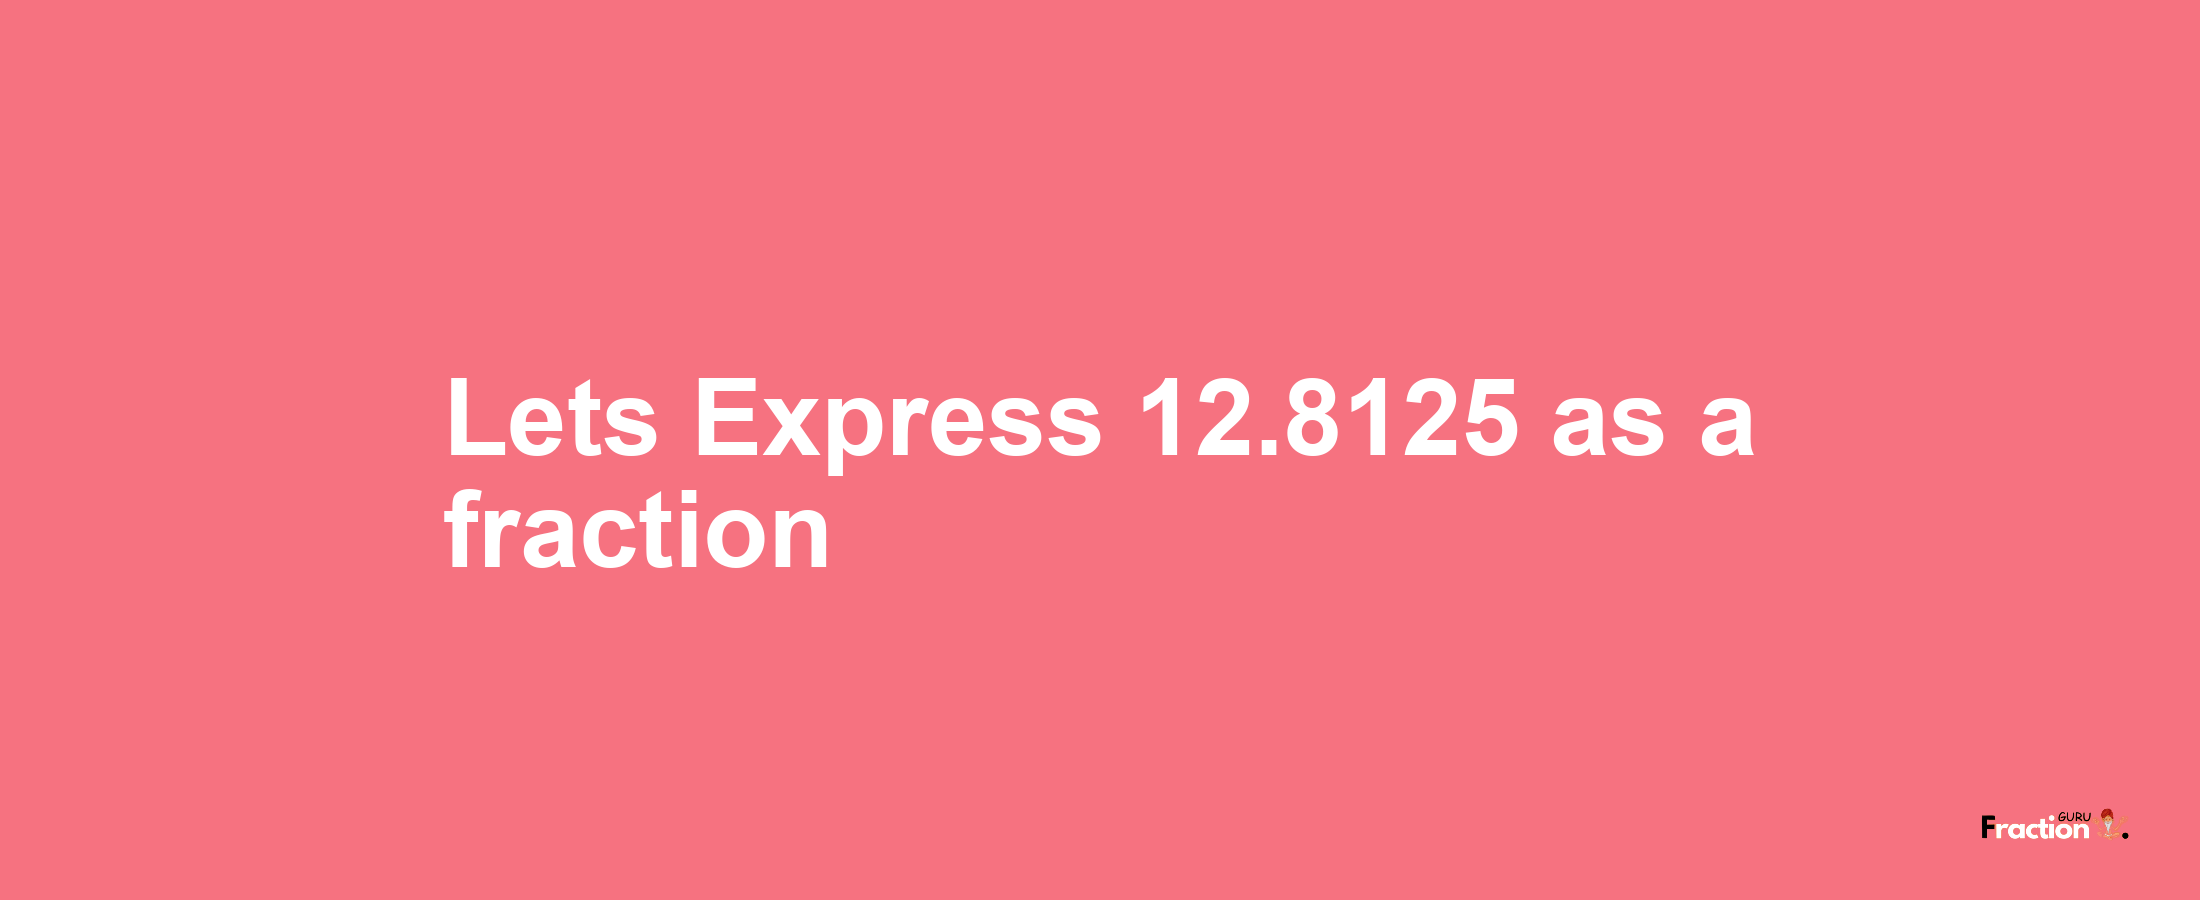 Lets Express 12.8125 as afraction